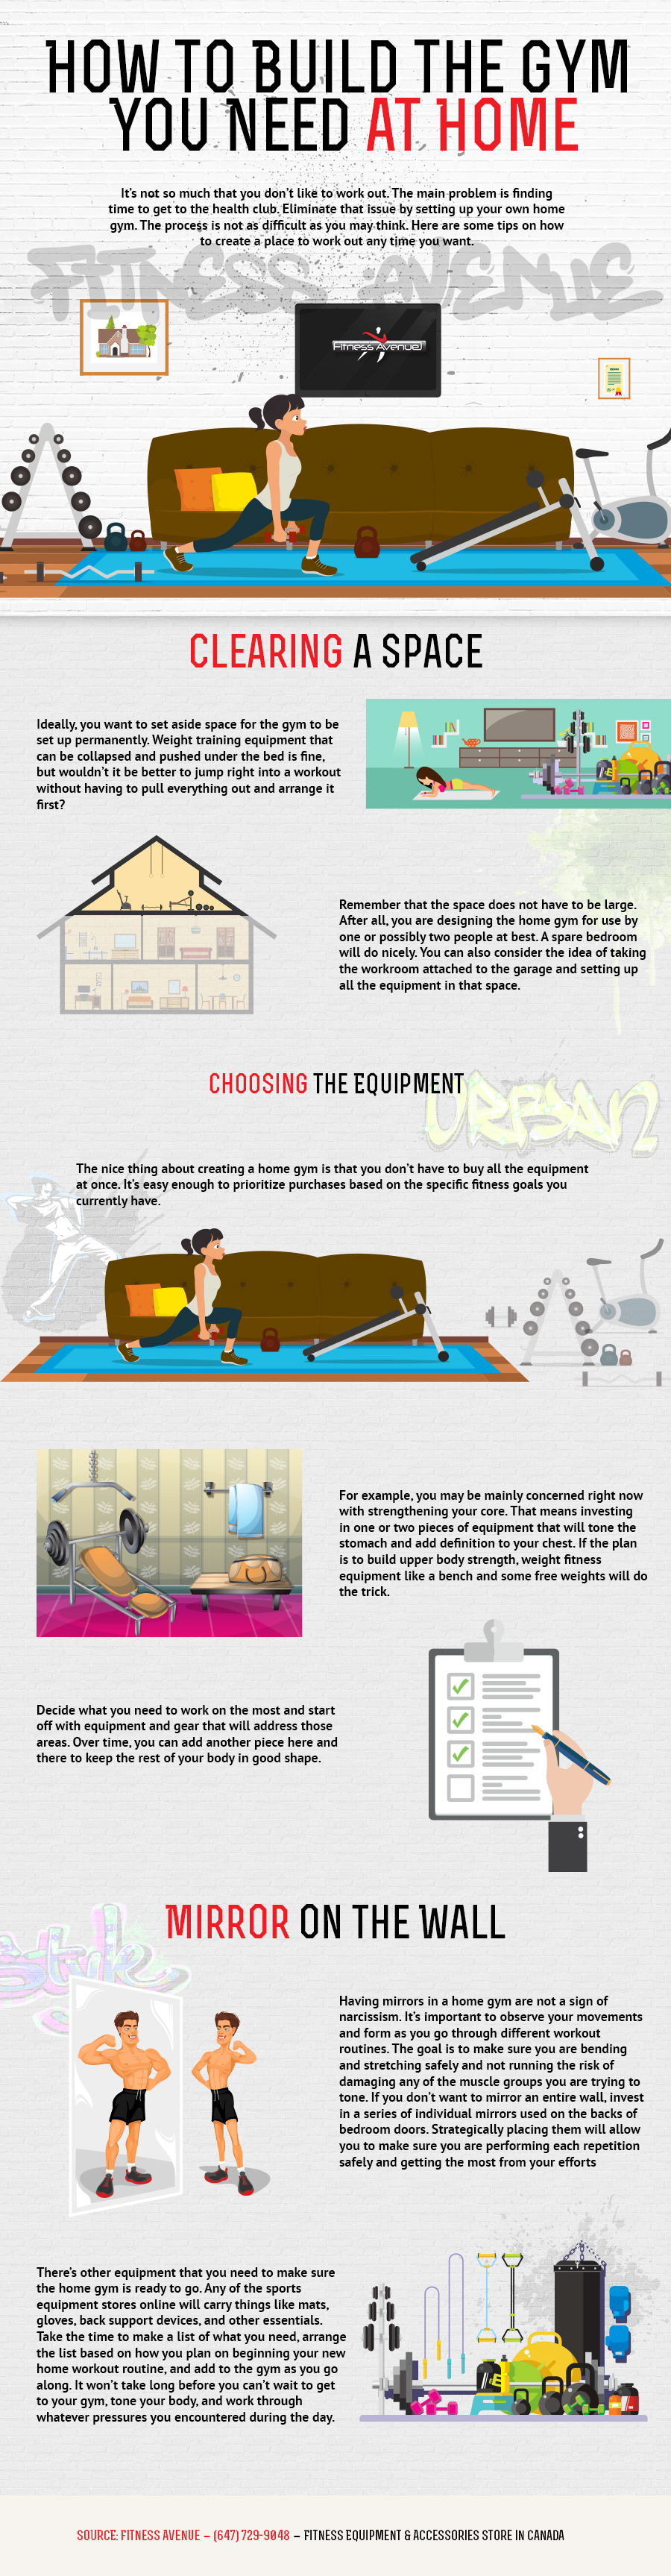 How to Build the Gym you Need at Home